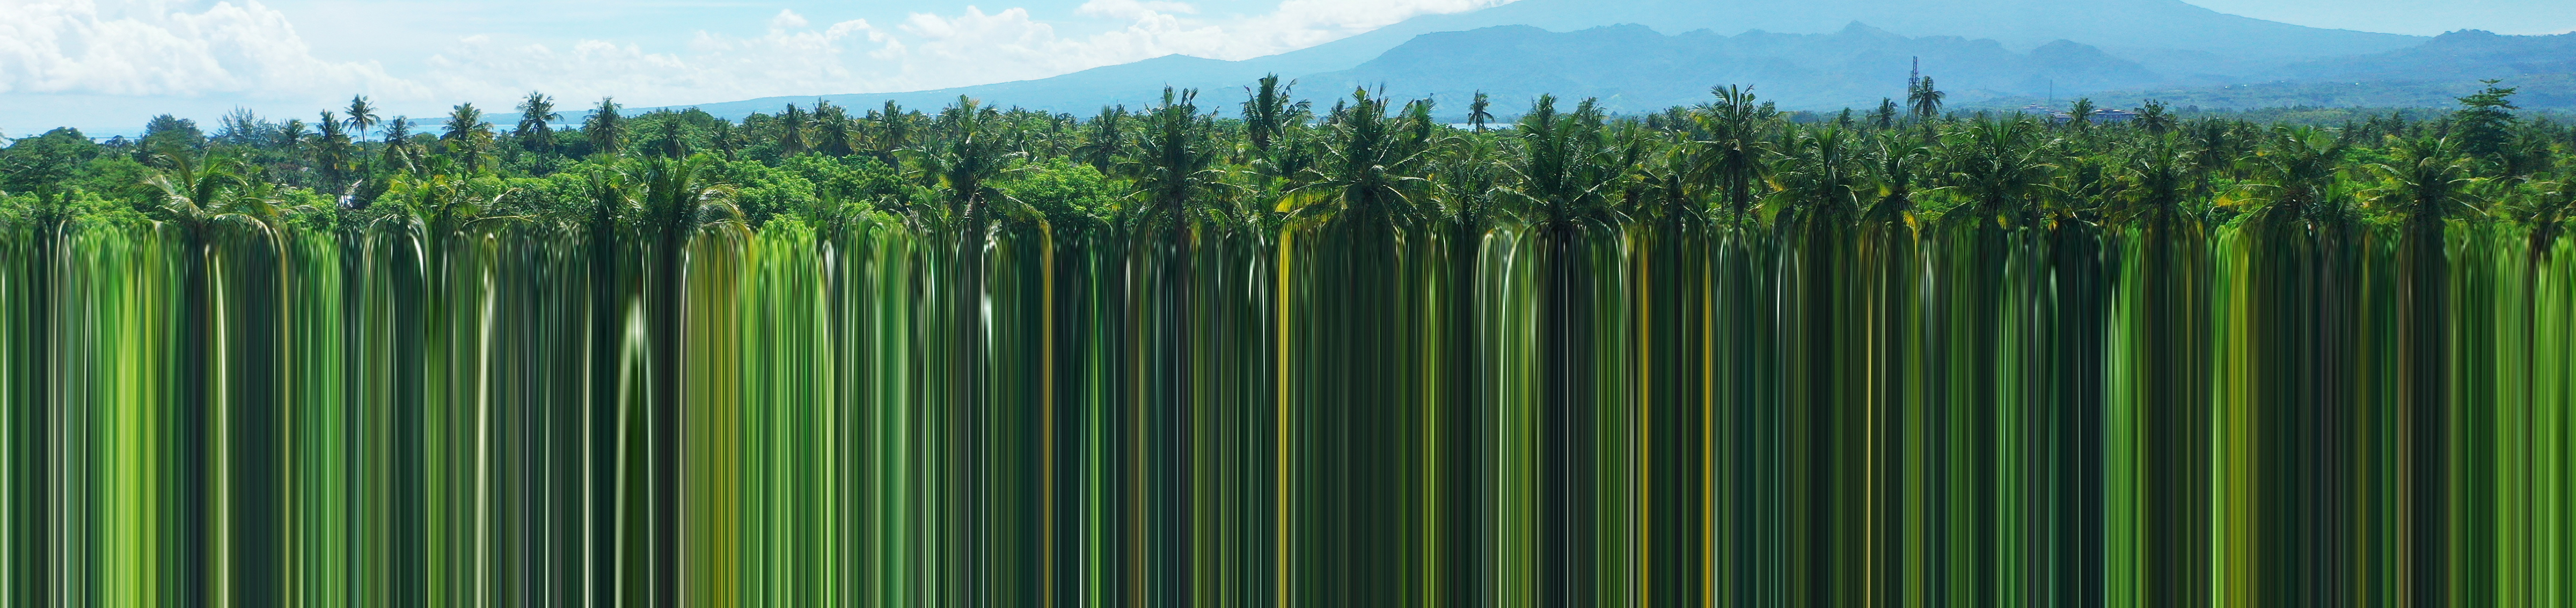 Digital generated image of tropical forest transforming into green digital stripe barcode pattern.